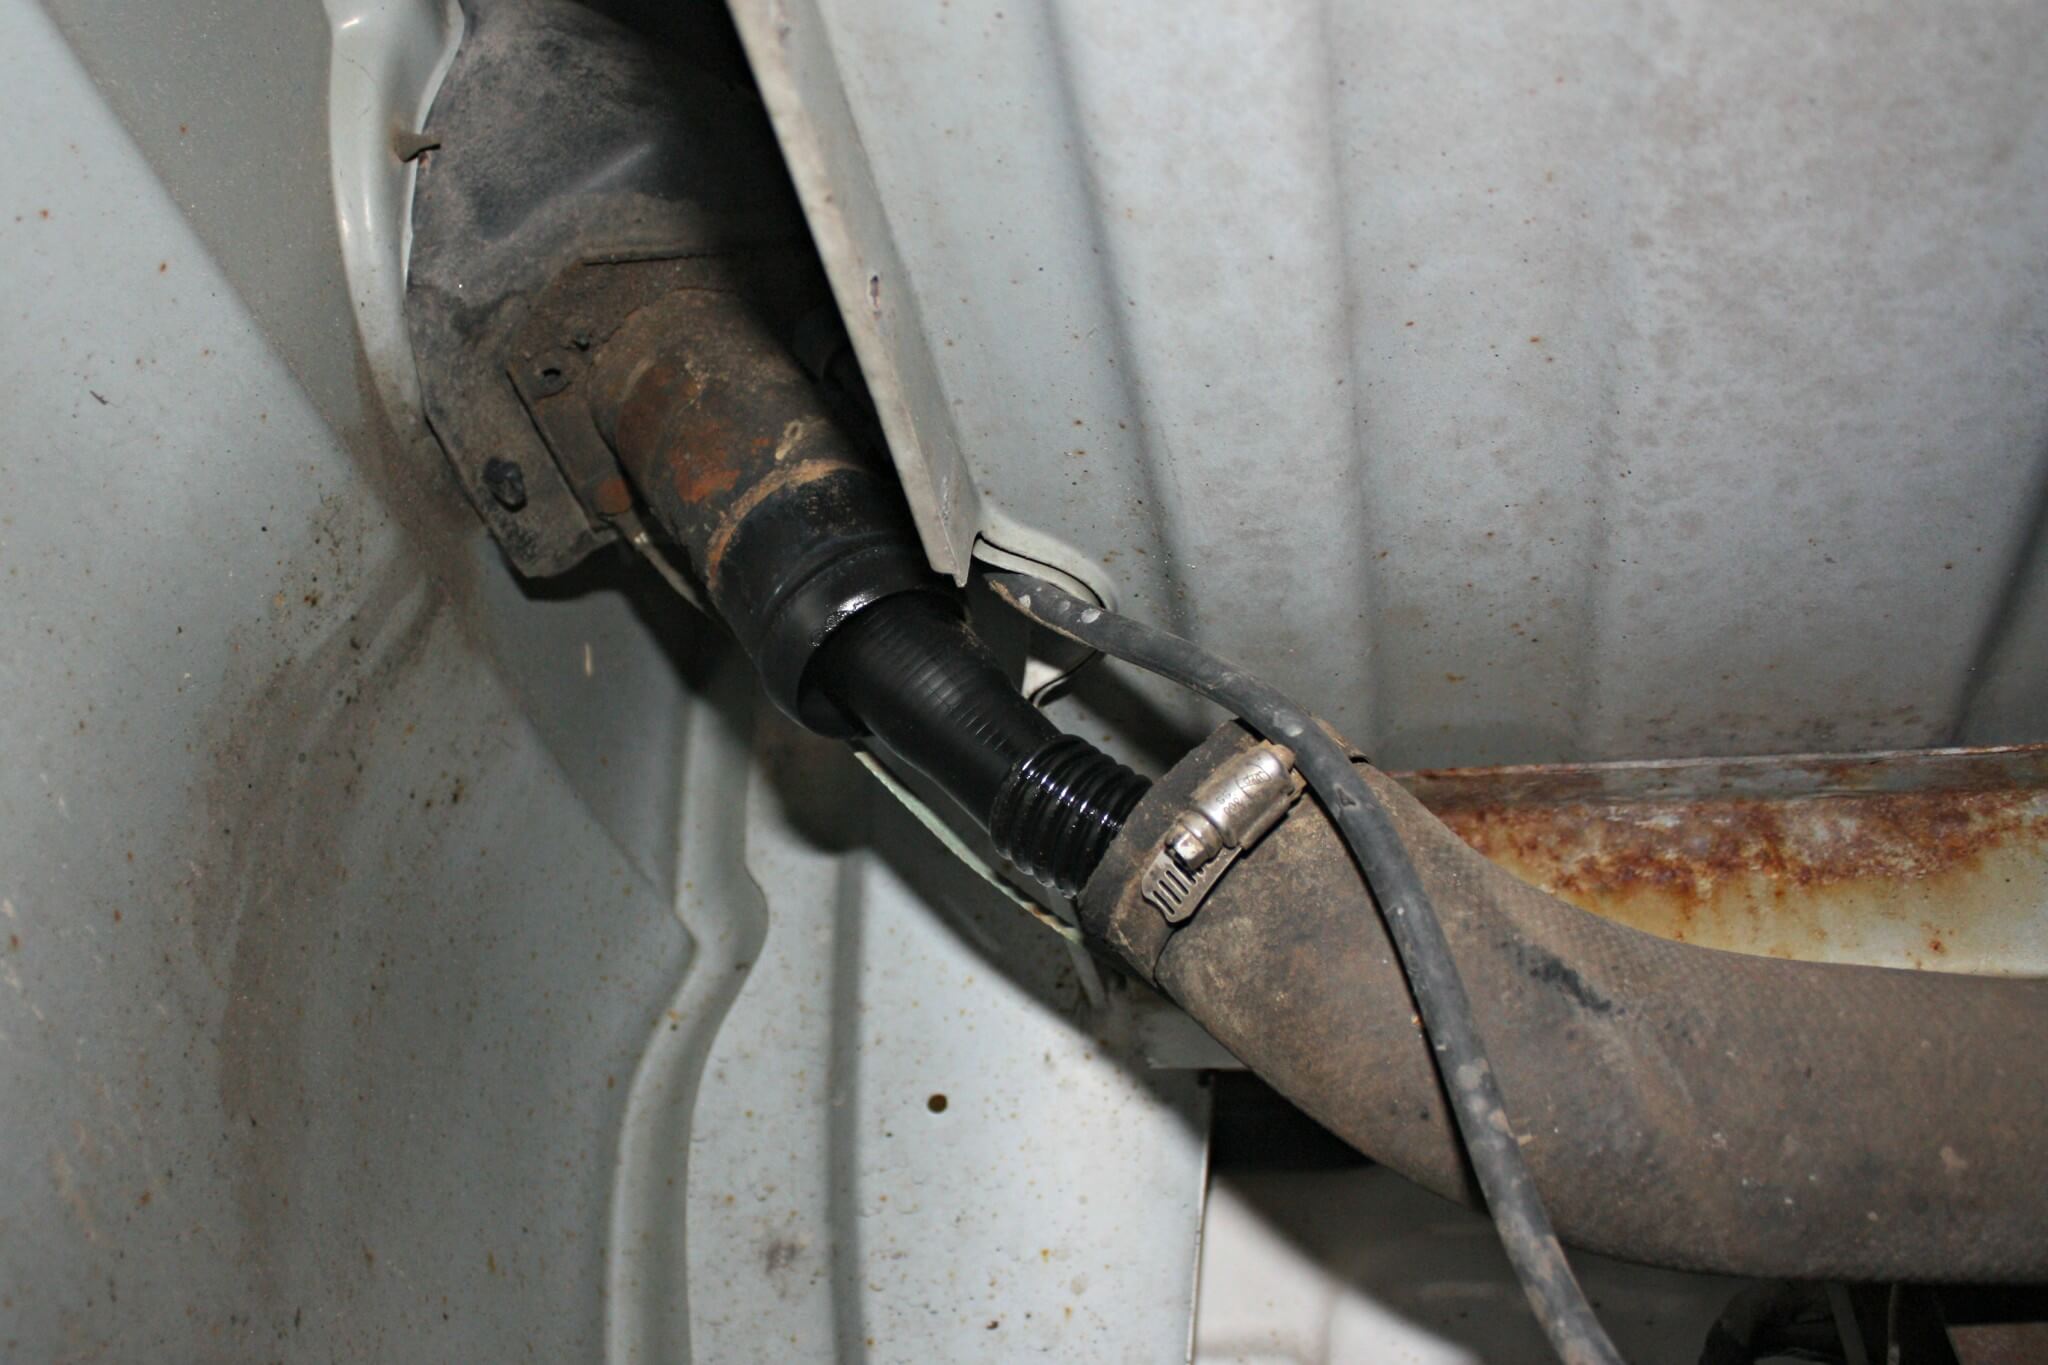 2. On the 2001-2010 GM Duramax application, seen here, the Velocity pump installation will take an average of three to four hours to complete. Some fuel system tools are required that may not be in your toolbox, most specifically a fuel line disconnect tool. The first step to the basic install of the kit involves removing the fuel tank for installation of the supplied pick-up tube. Since we’ll be replacing it with a full billet fuel sump kit from Deviant Race Parts (DRP), this fuel tank will not be dropped from the vehicle. However, the factory fill tube needs to be removed and spliced with the new return line from the Fuelab pump.